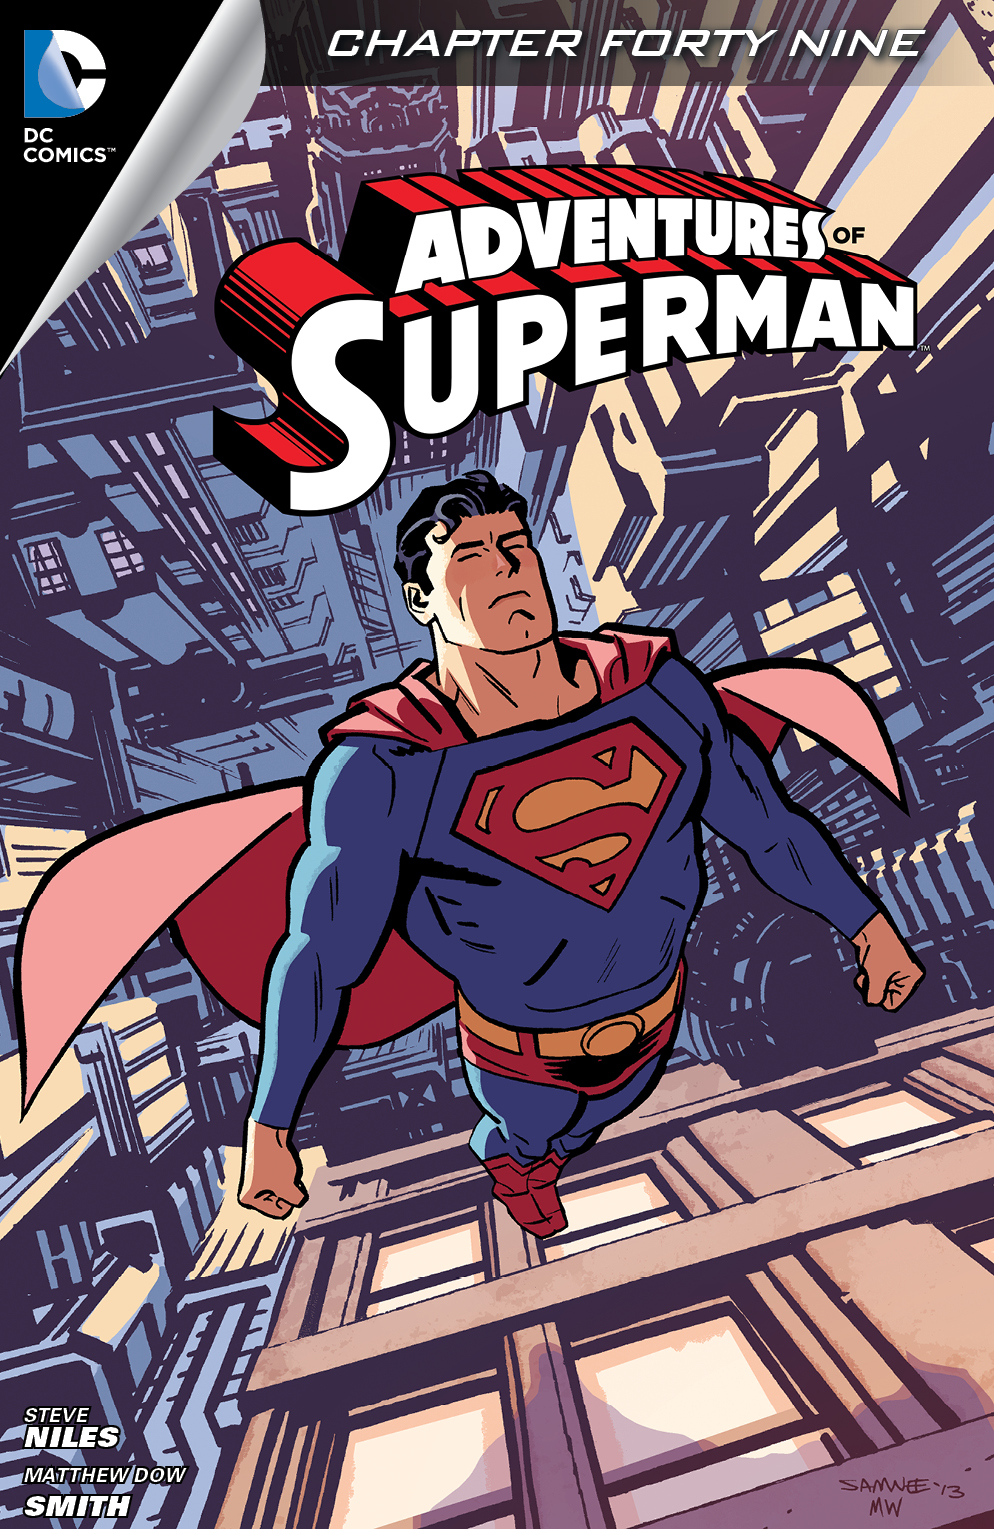 Adventures of Superman (2013-) #49 preview images